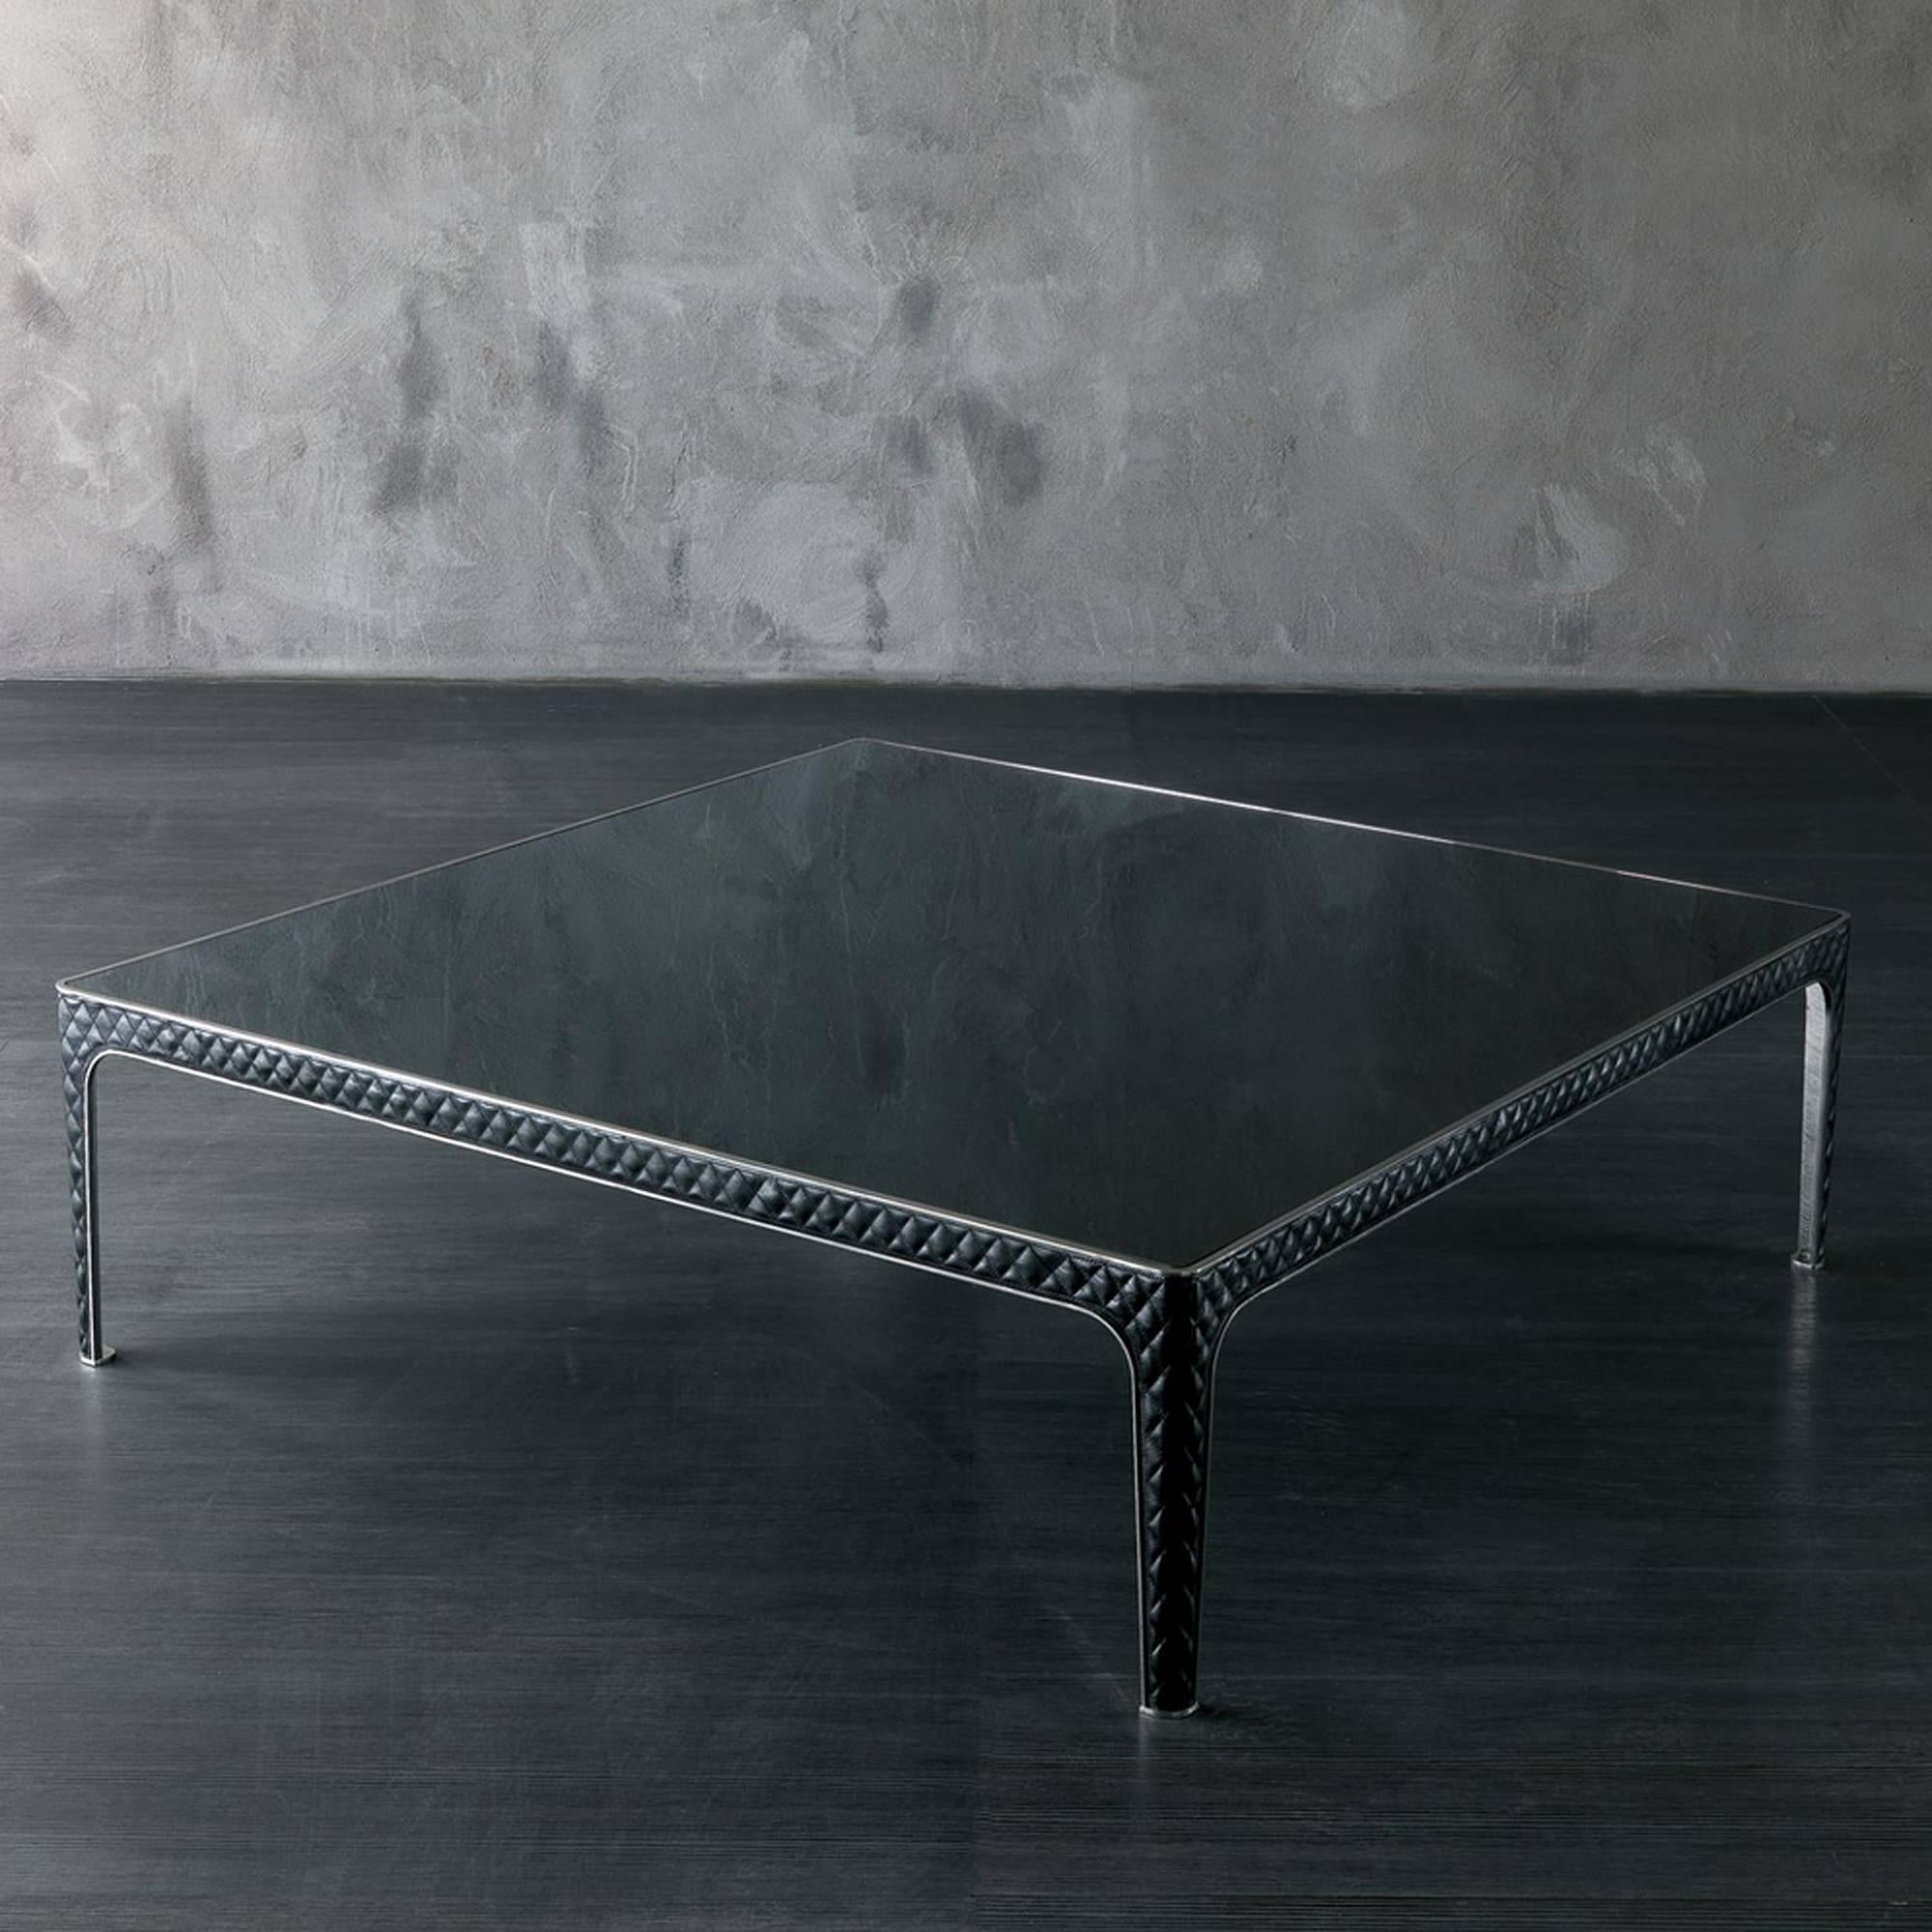 Coffee table with structure in polished stainless steel
with black glass top. Legs covered with capitonated black 
genuine leather (Cat C).
Available in:
L90,9xD90,9xH38,8cm, price: 6900,00€.
L130,9xD130,9xH38,8cm, price: 8500,00€.
Also available